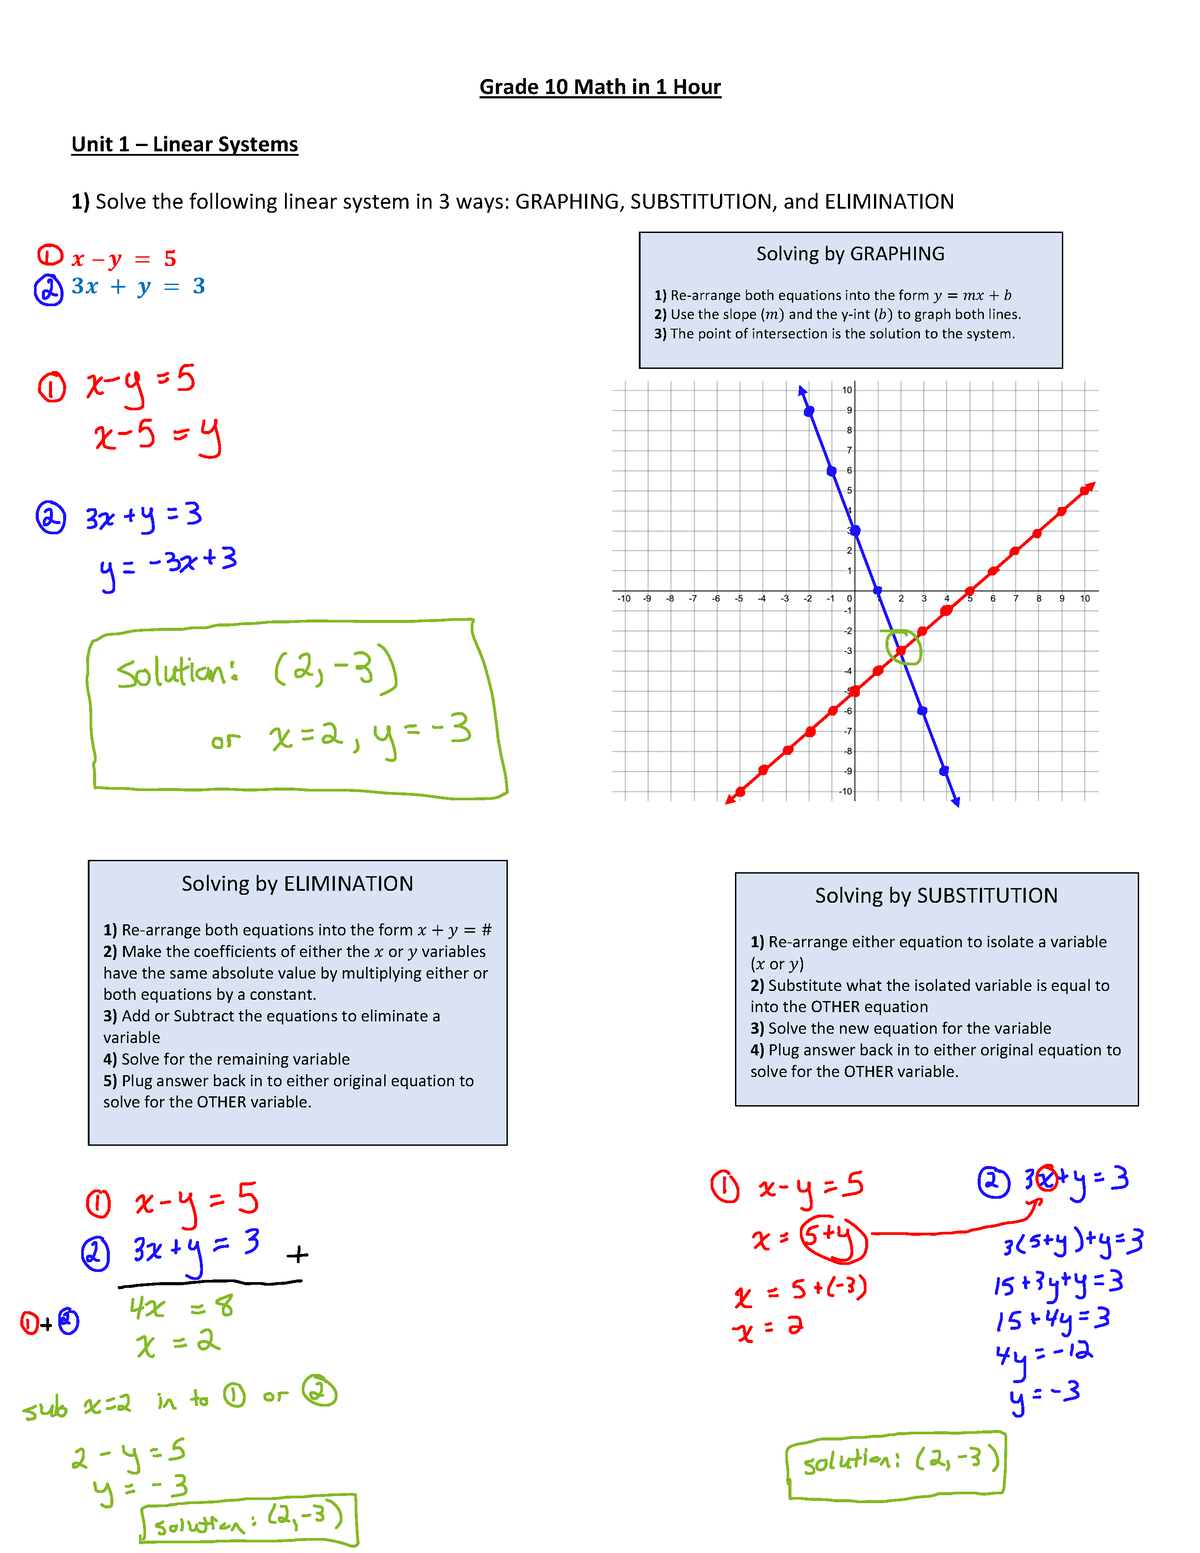 grade-10-math-review-tutorial-solutions-grade-10-math-in-1-hour-unit-1-linear-systems-1